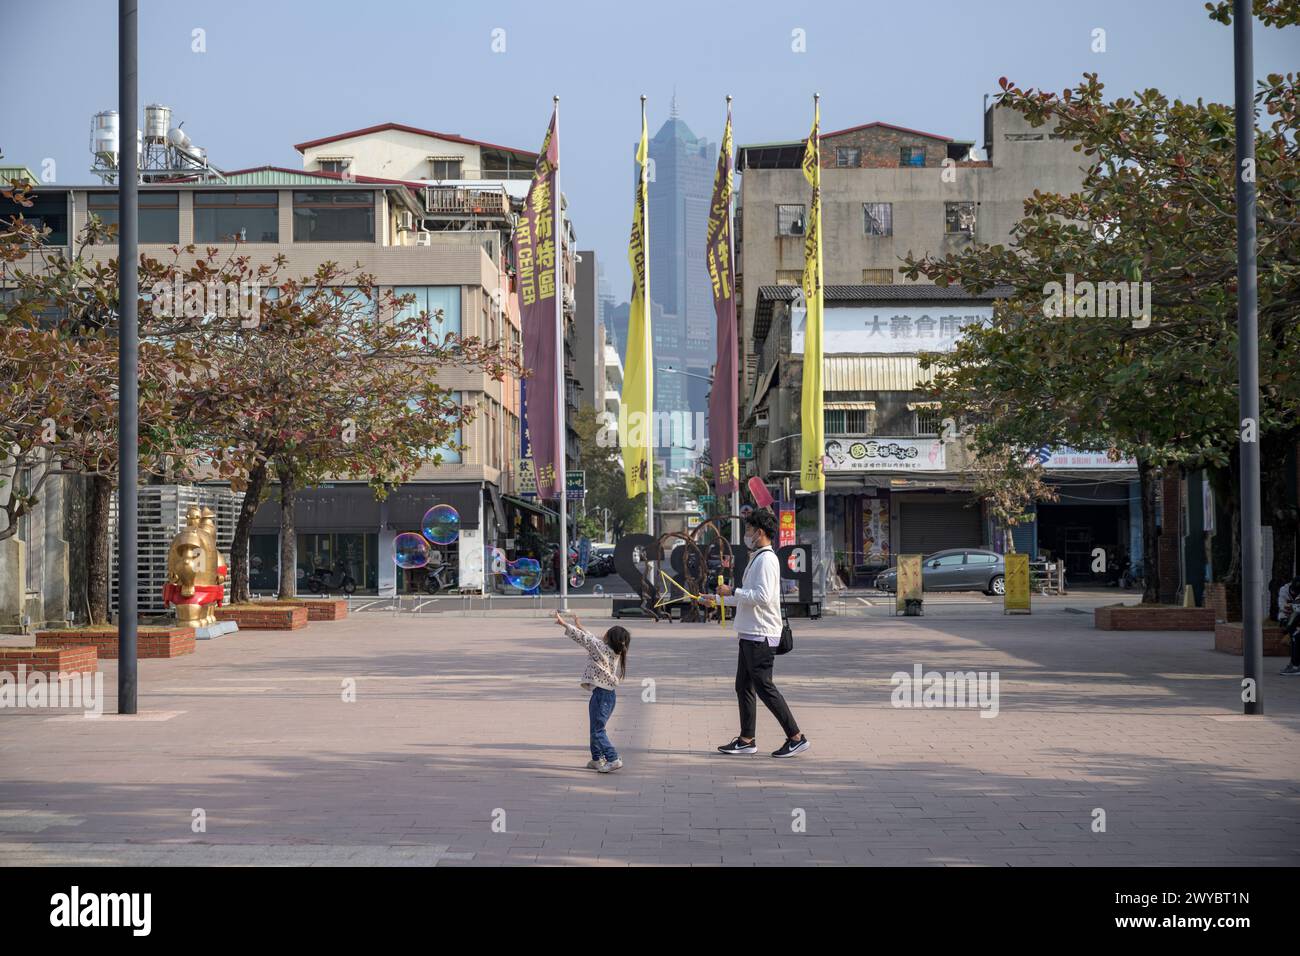 A child runs after soap bubbles in a spacious urban square surrounded by people and city buildings Stock Photo